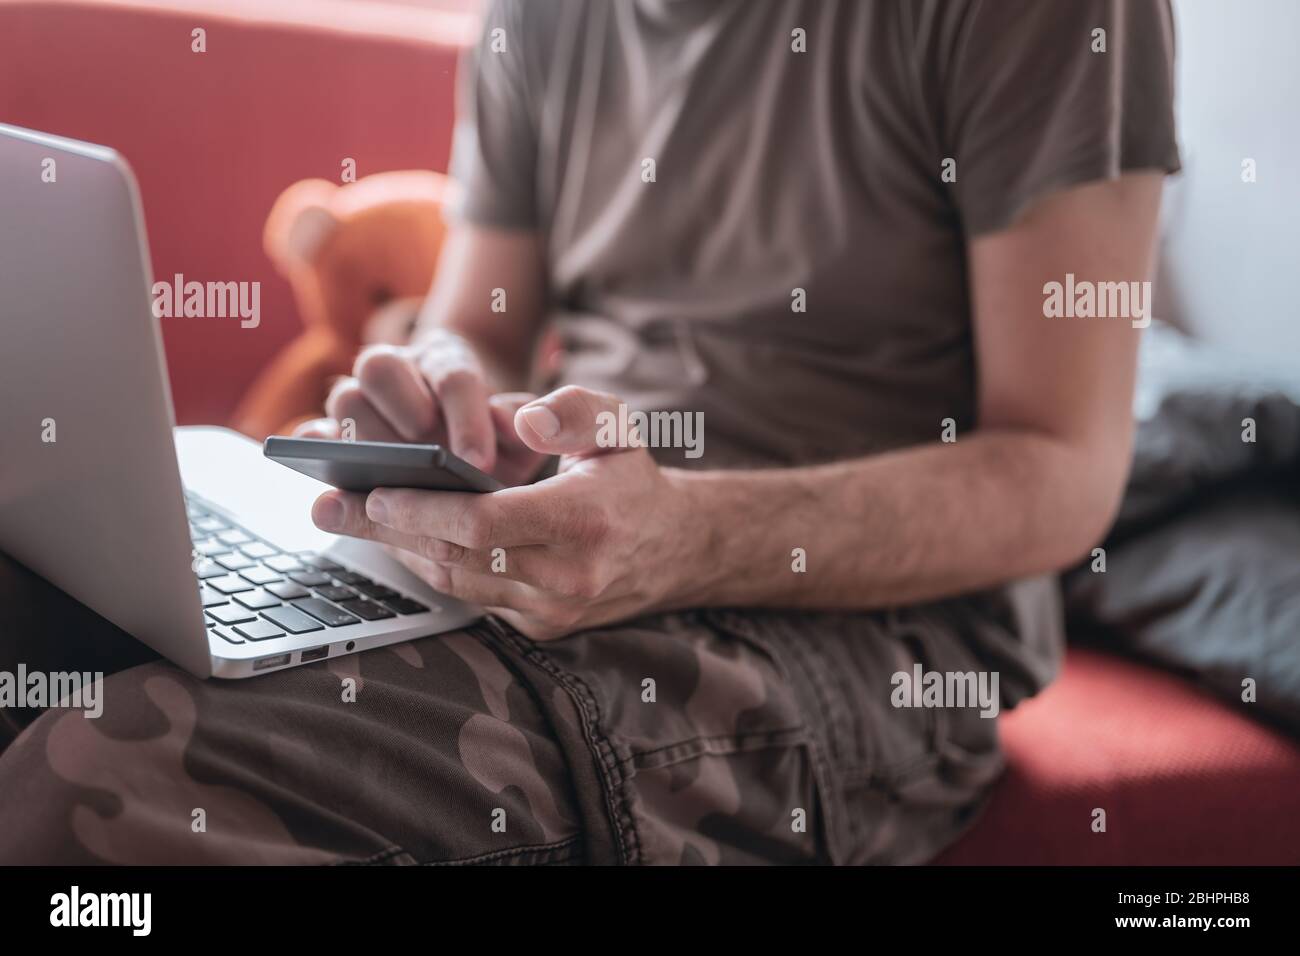 Working from home - telecommuting during covid-19 coronavirus outbreak, man using laptop and mobile phone Stock Photo